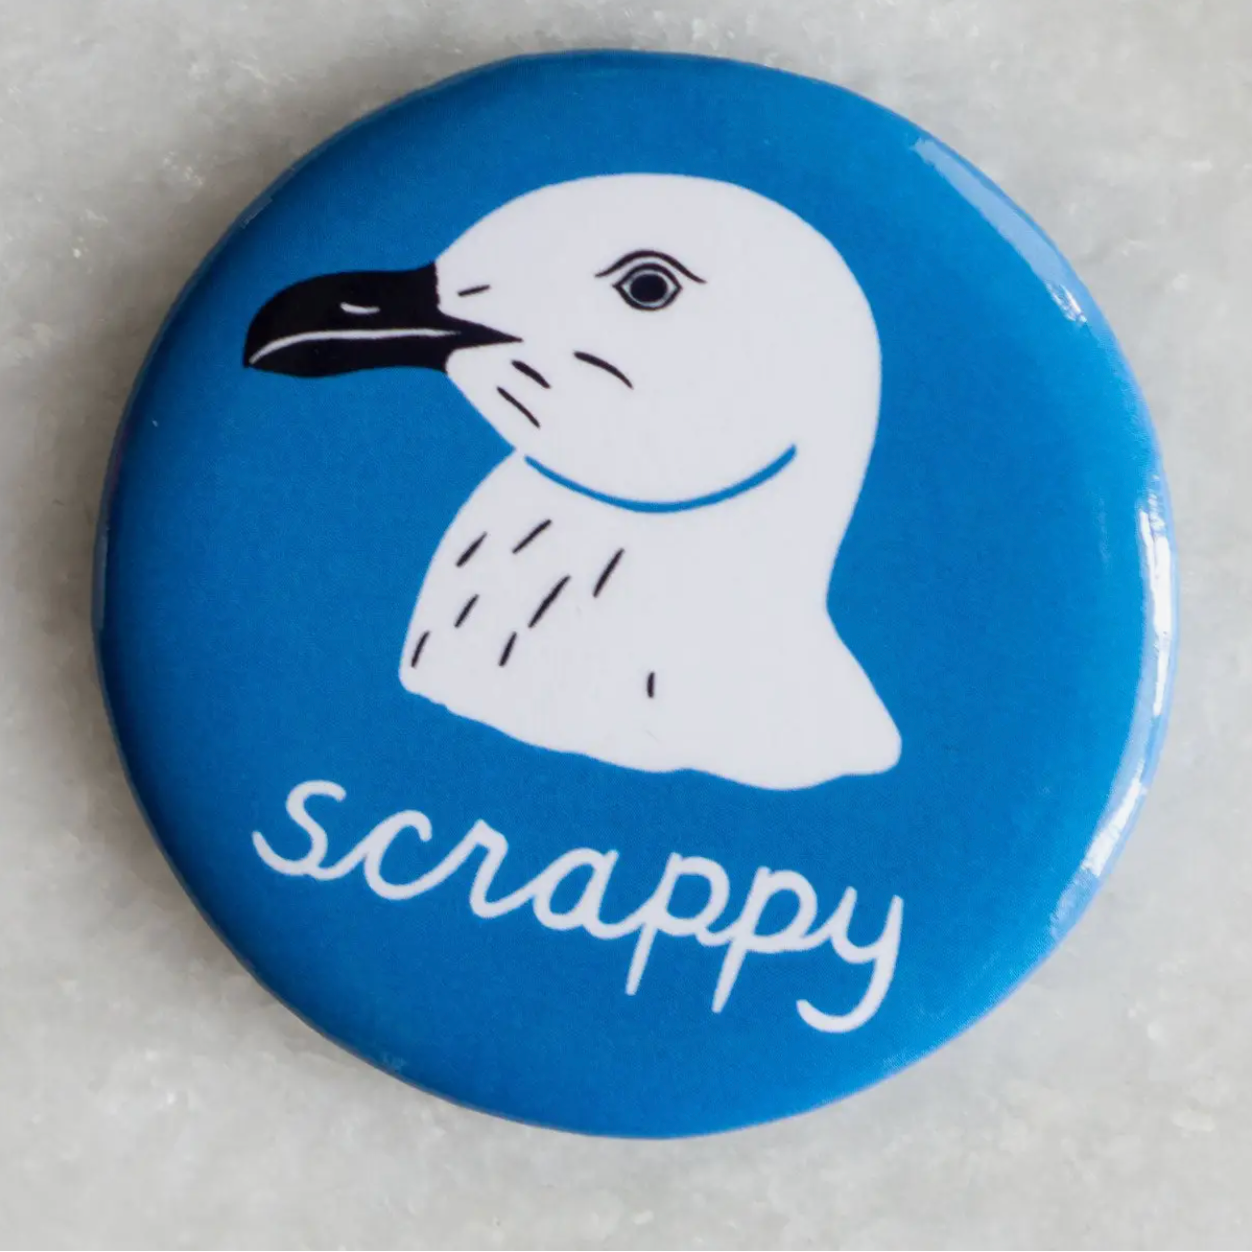 Scrappy Seagull Magnet